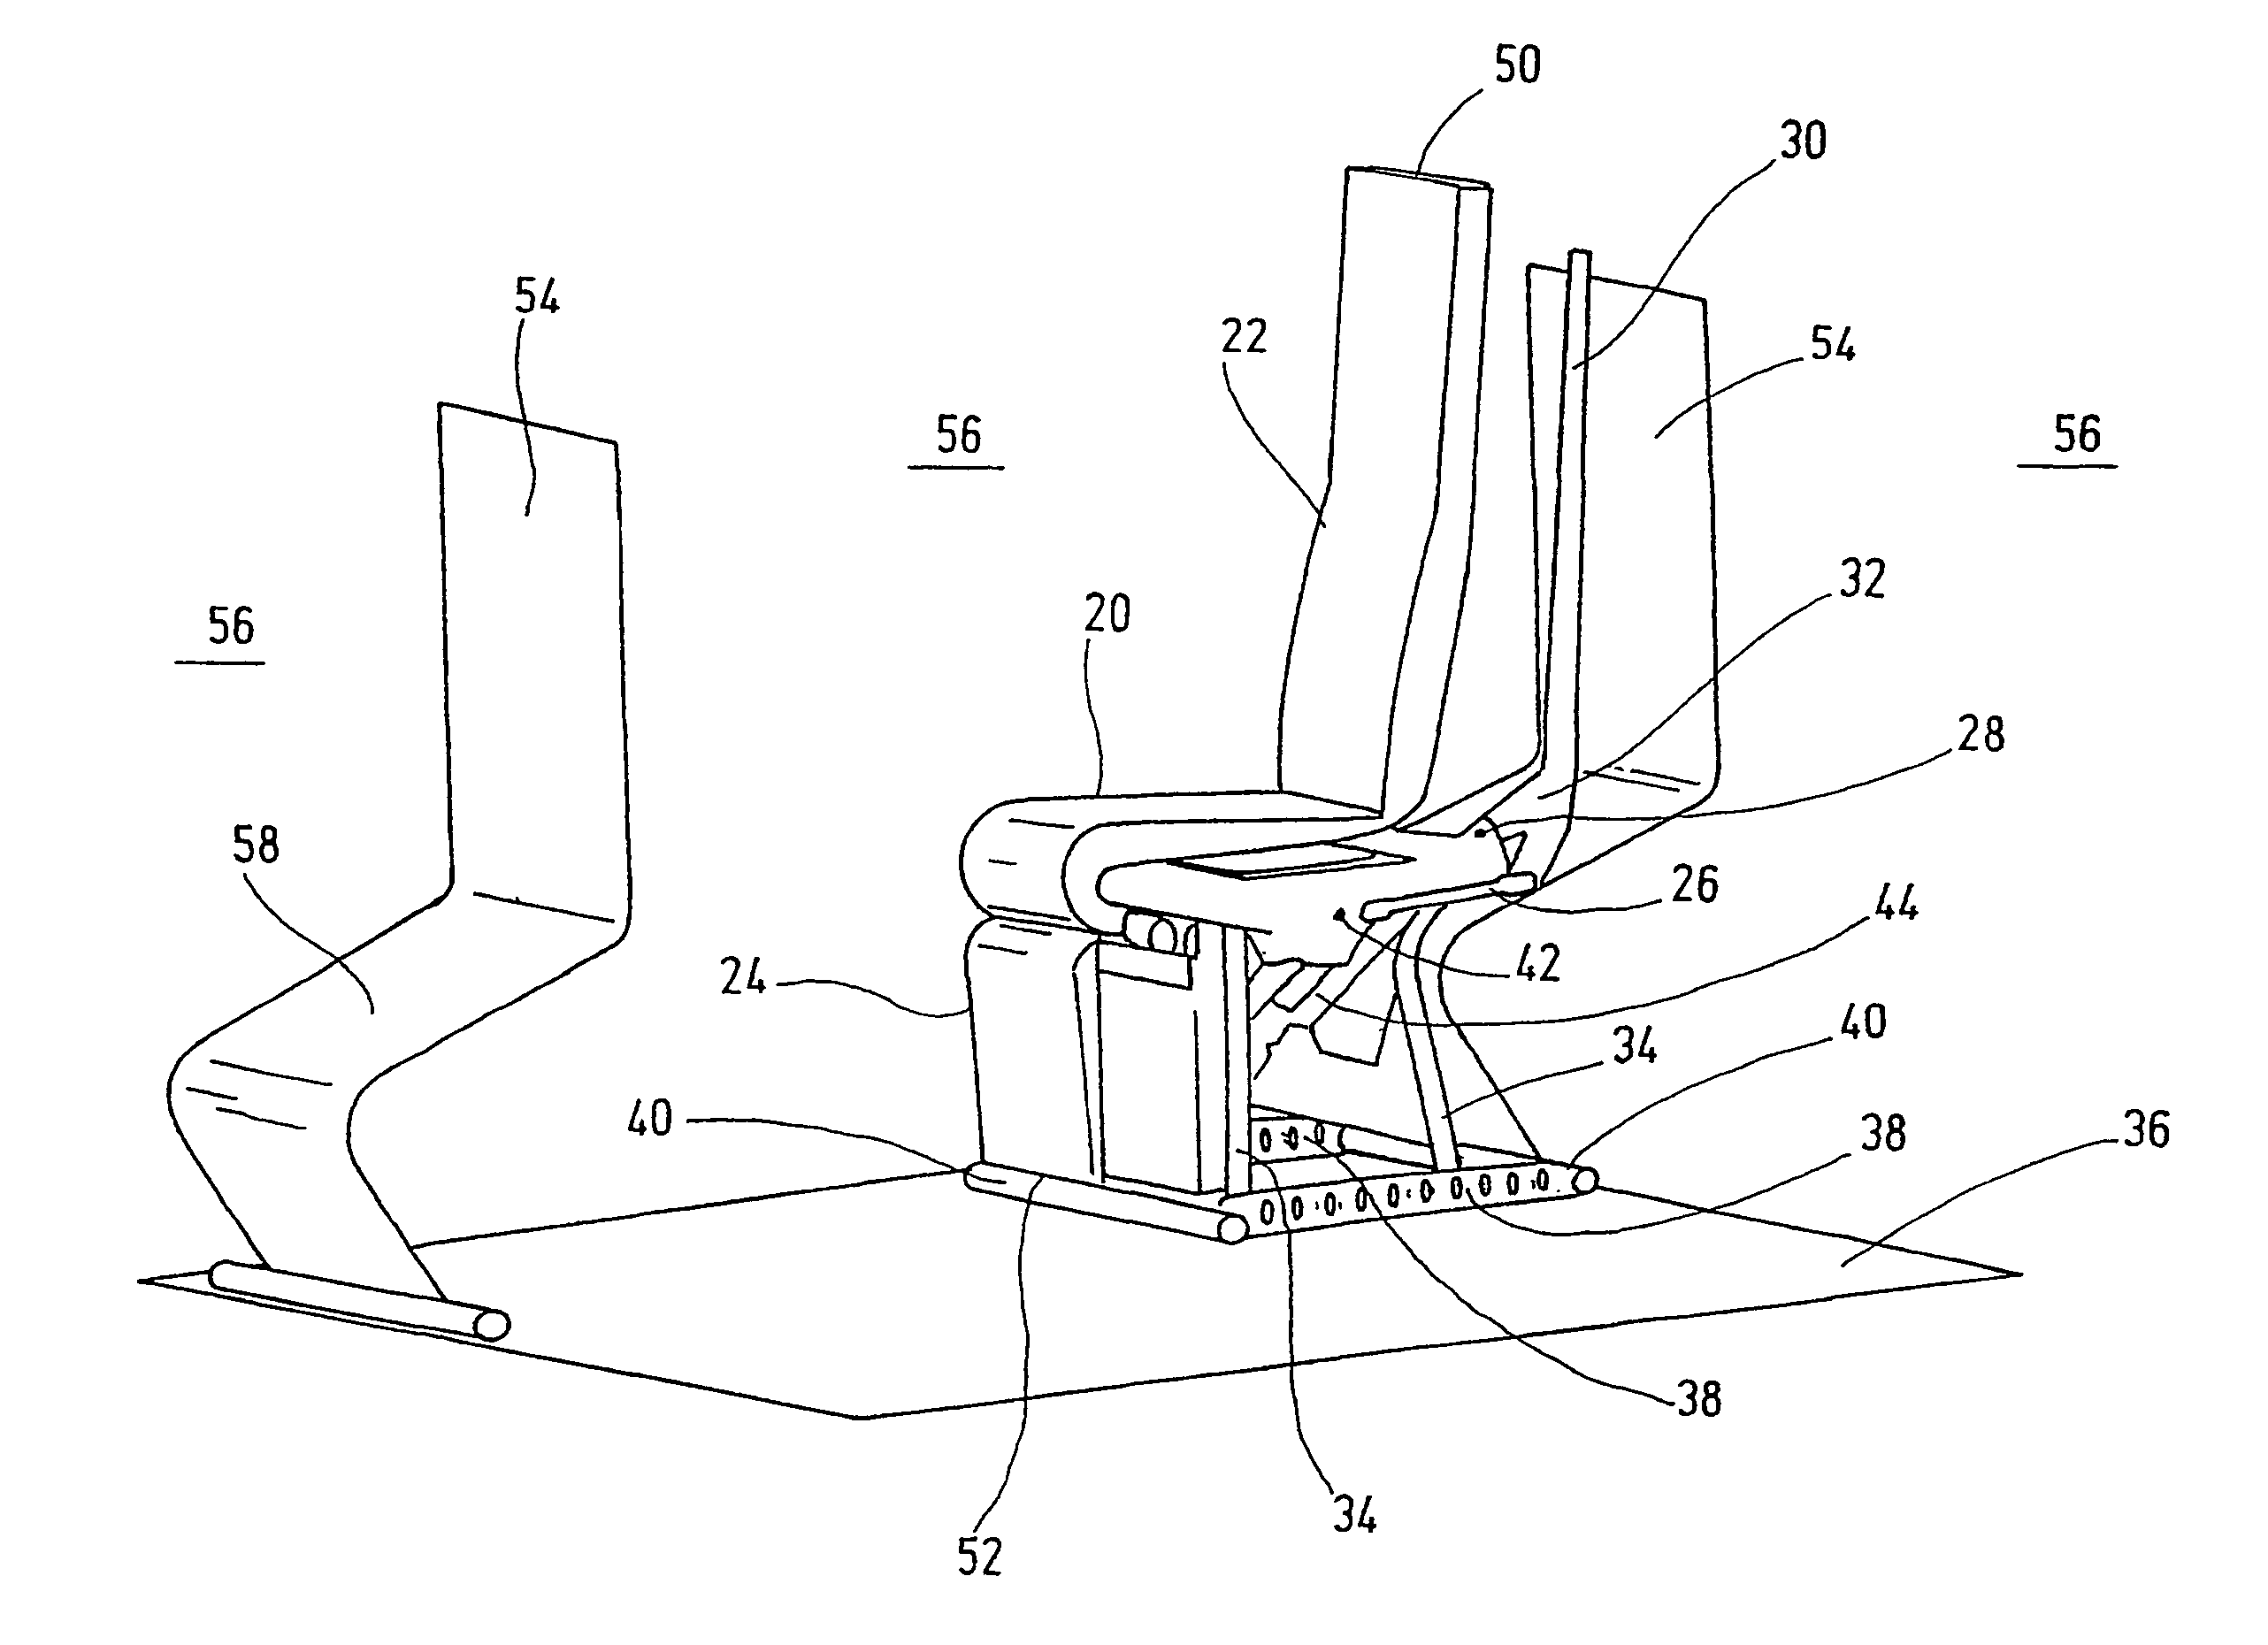 Vehicle seat with seating components adjustable within a spatial constraint